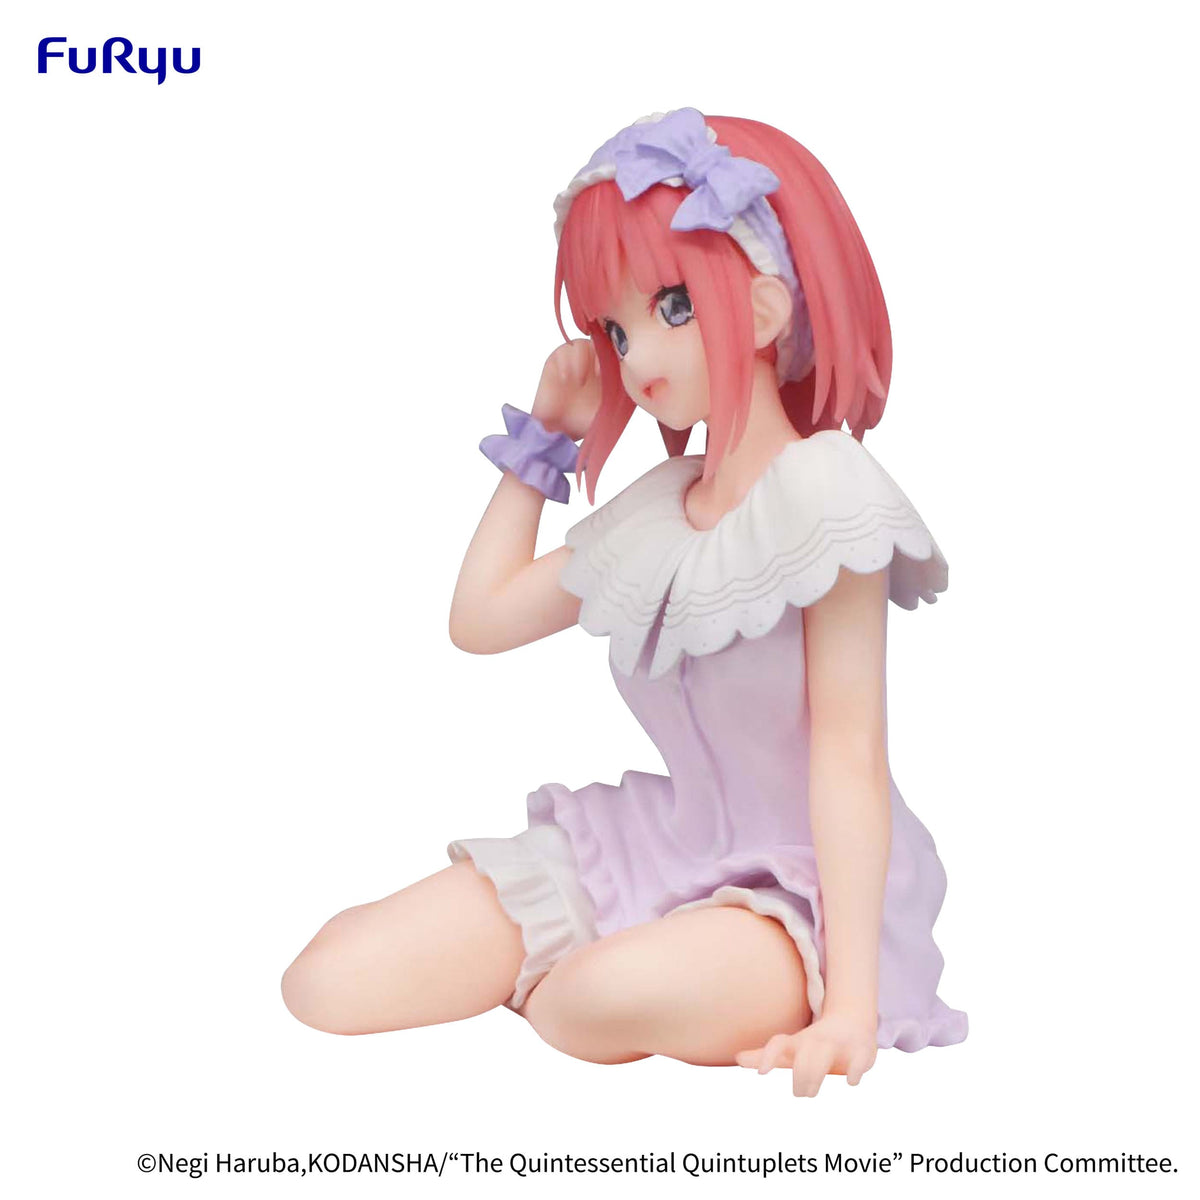 The Quintessential Quintuplets - Nino Nakano - Loungewear Noodle Stopper Figur (Furyu)